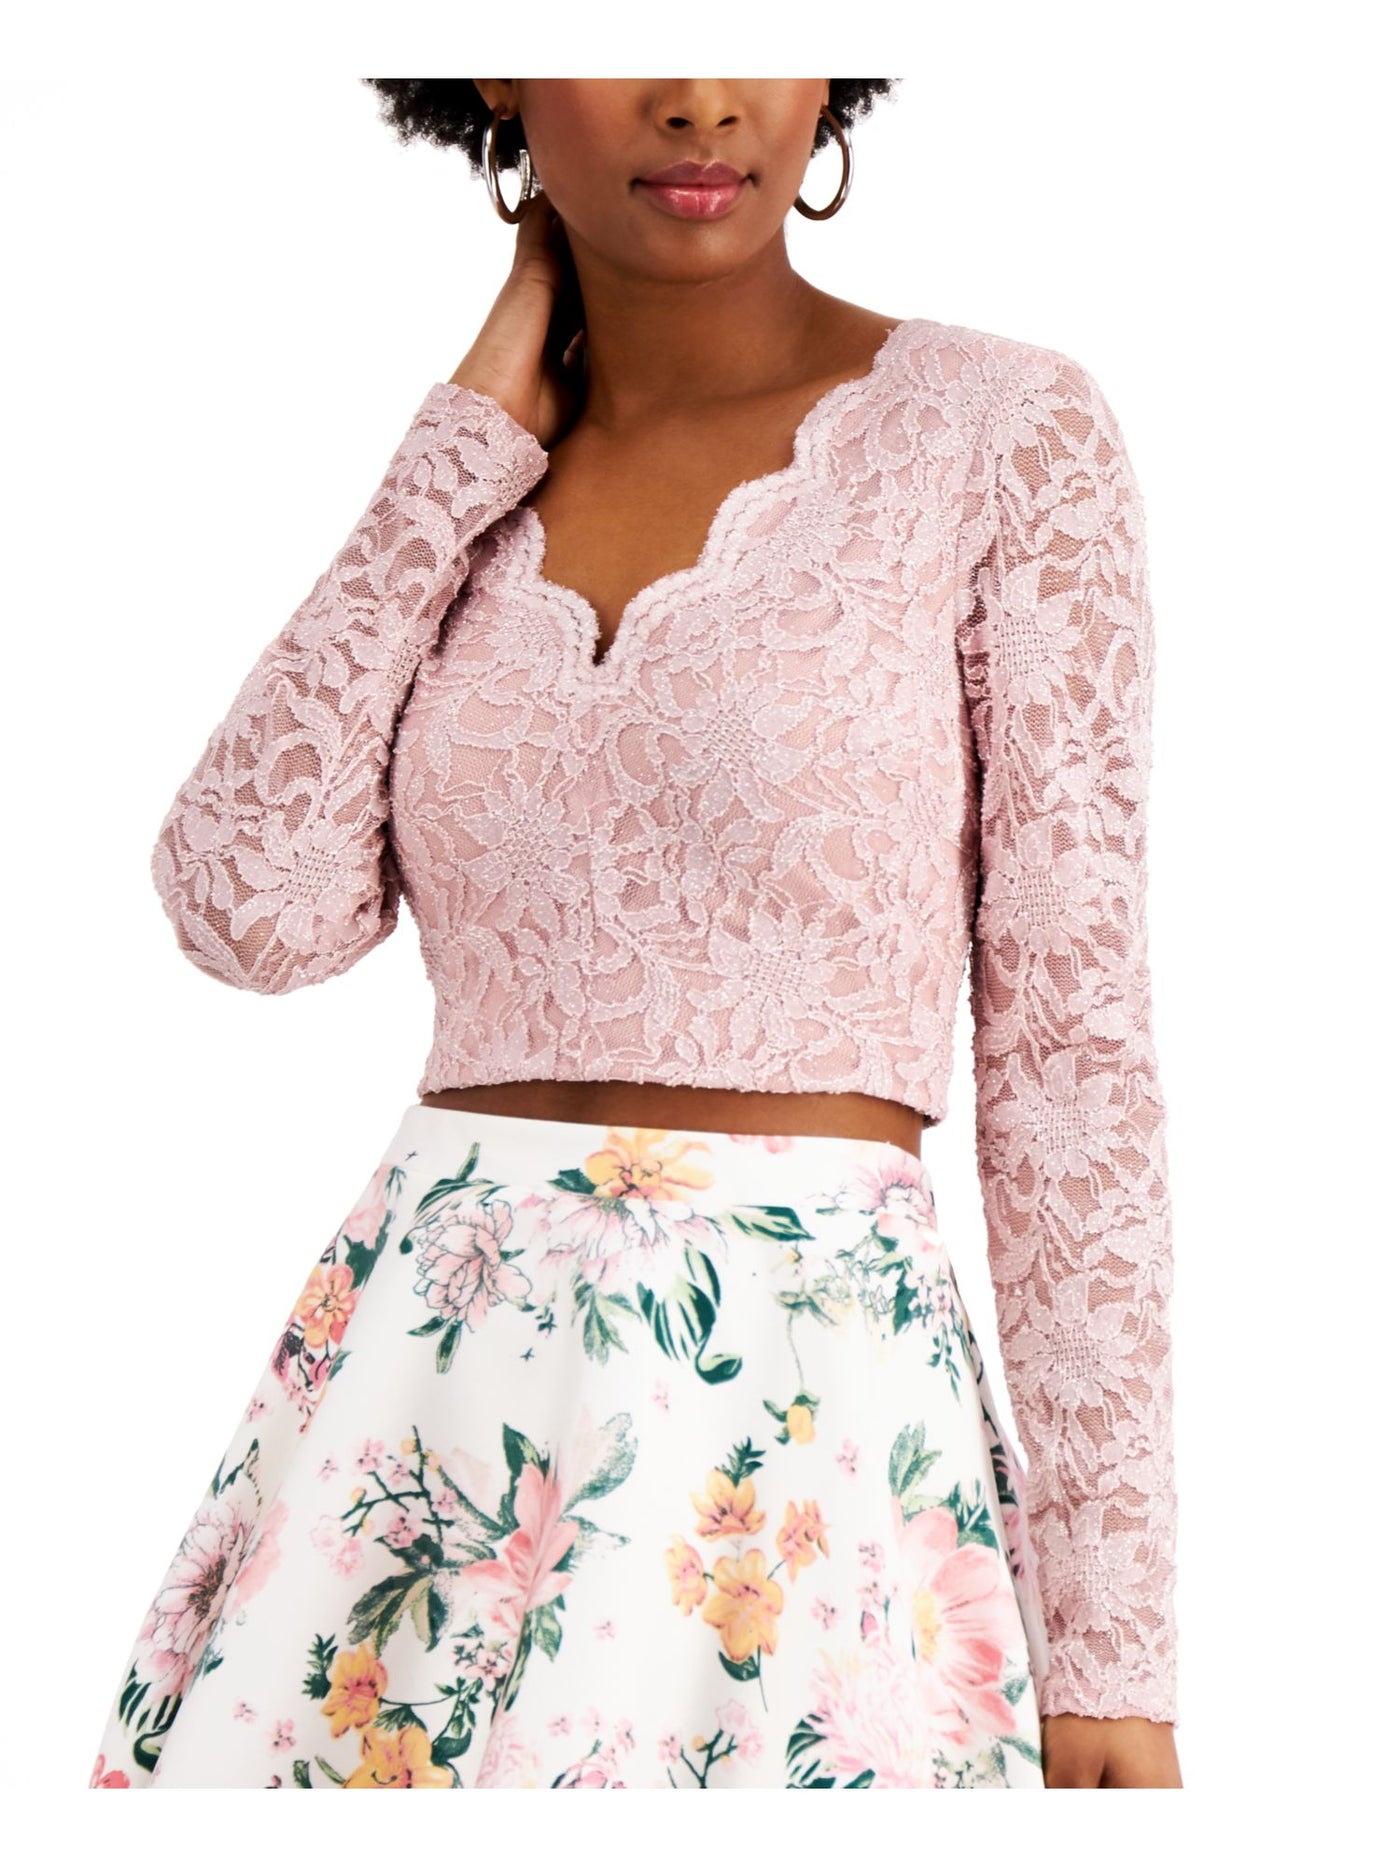 CITY STUDIO Womens Pink Zippered Low Cut Lace Deep-v At Back Floral Long Sleeve Evening Crop Top Juniors 1